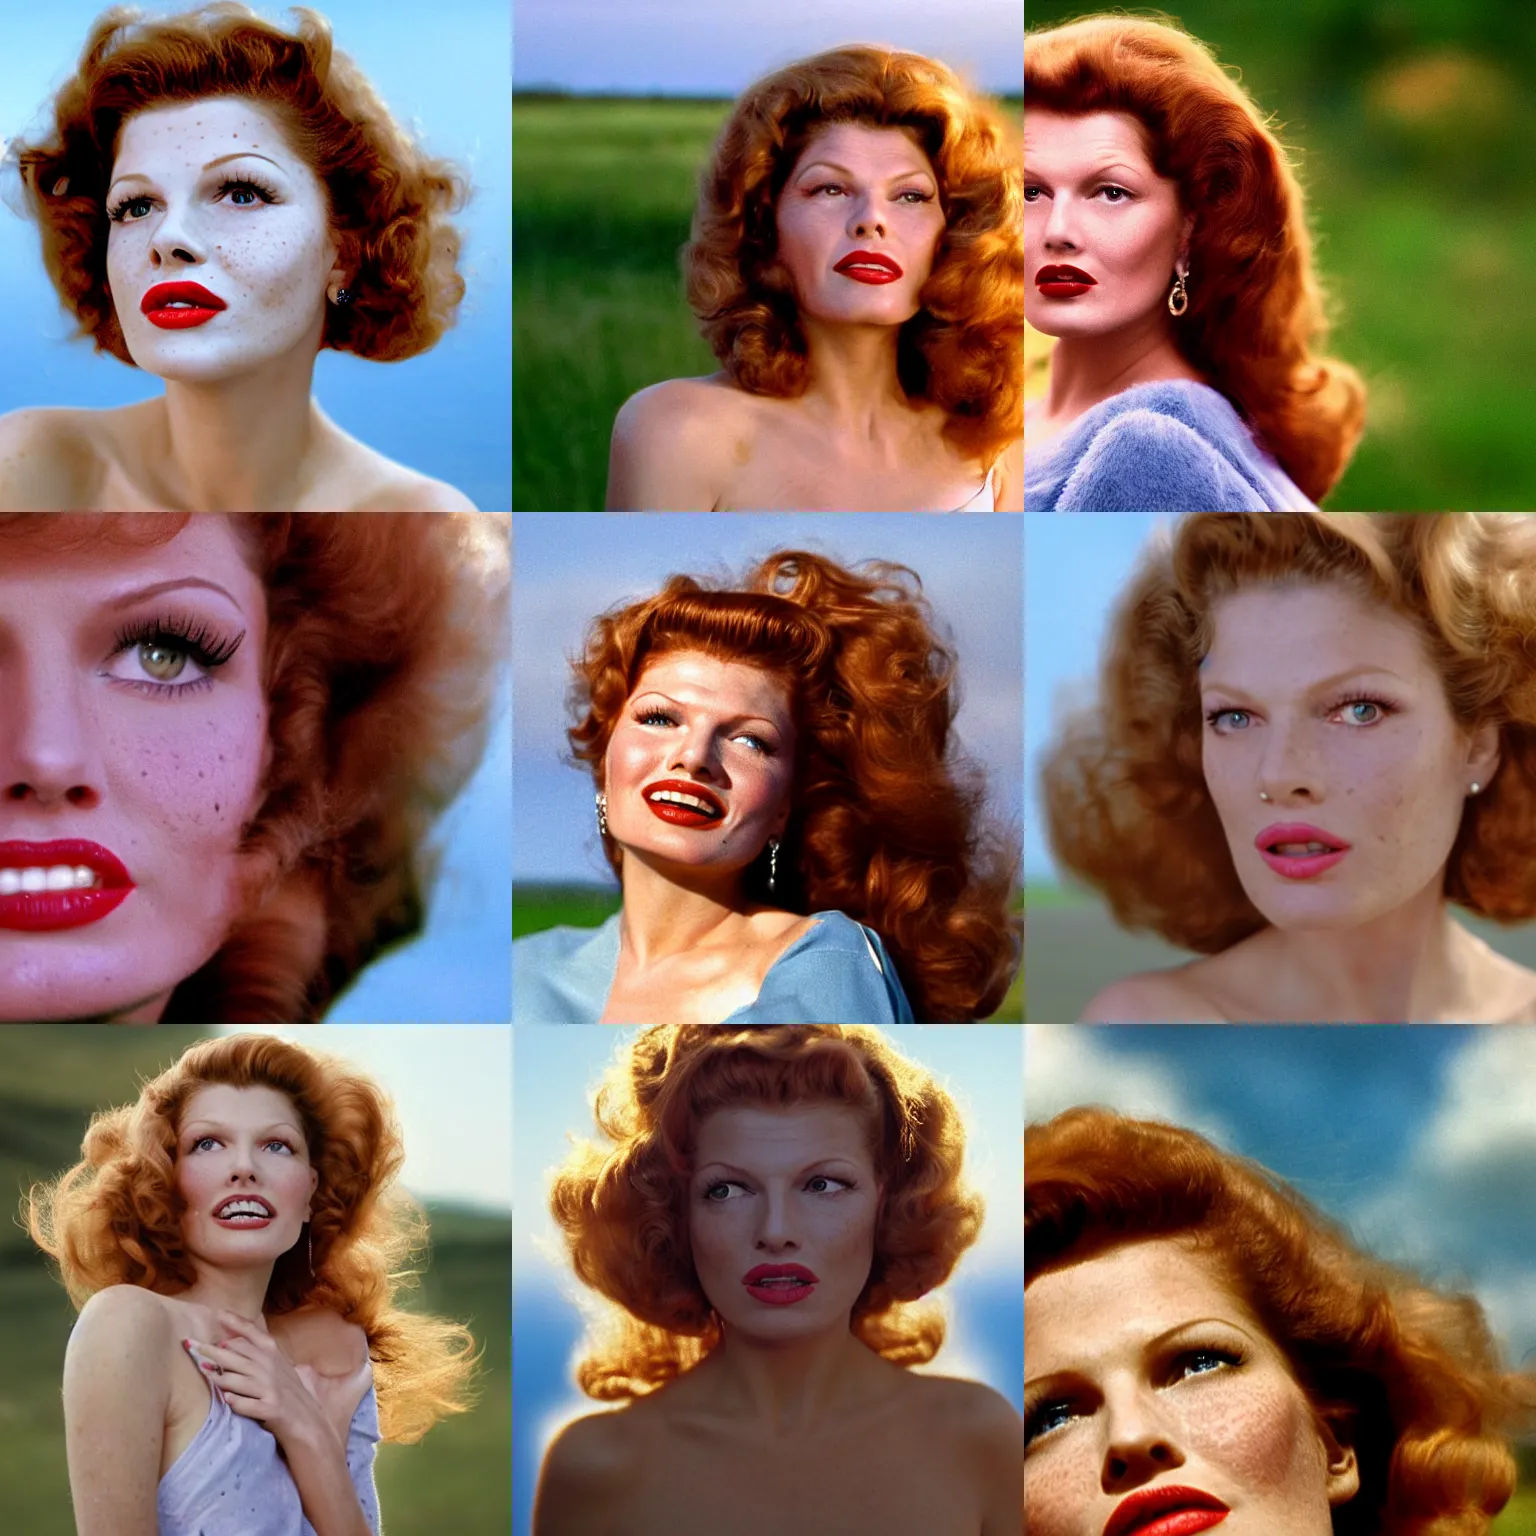 Prompt: natural 8 k close up shot from a 2 0 0 5 romantic comedy by sam mendes of rita hayworth with freckles, natural skin, beauty spots small lips and brown lipstick. she stands and looks on the horizon with winds moving her hair. fuzzy blue sky in the background. no make - up, small details, natural lighting, 8 5 mm lenses, sharp focus